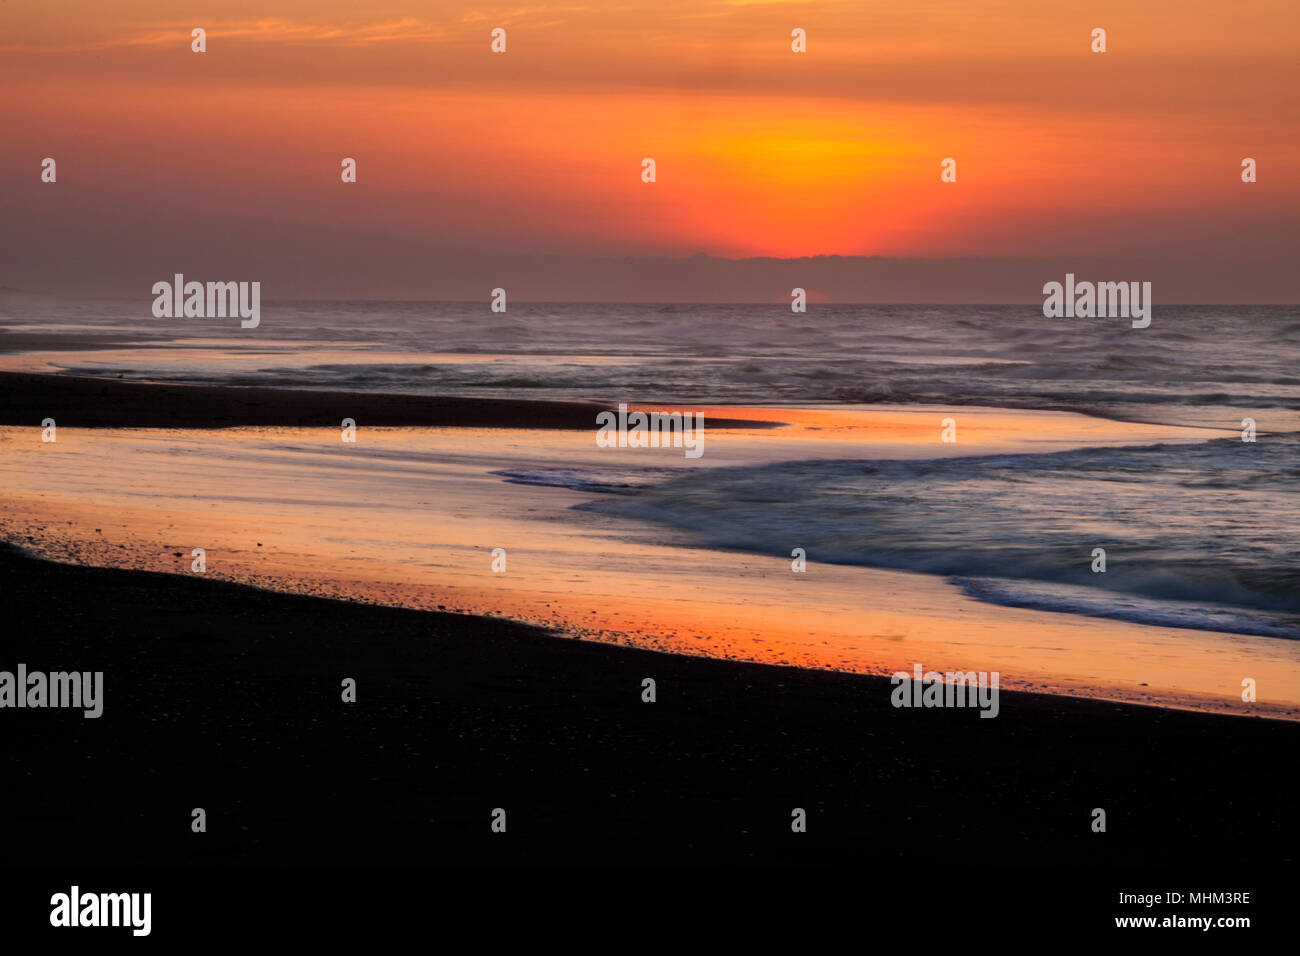 NC01566-00...NORTH CAROLINA - Sunrise over the Atlantic Ocean from the beach on Ocrracoke Island in the Outer Banks, Cape Hatteras National Seashore. Stock Photo